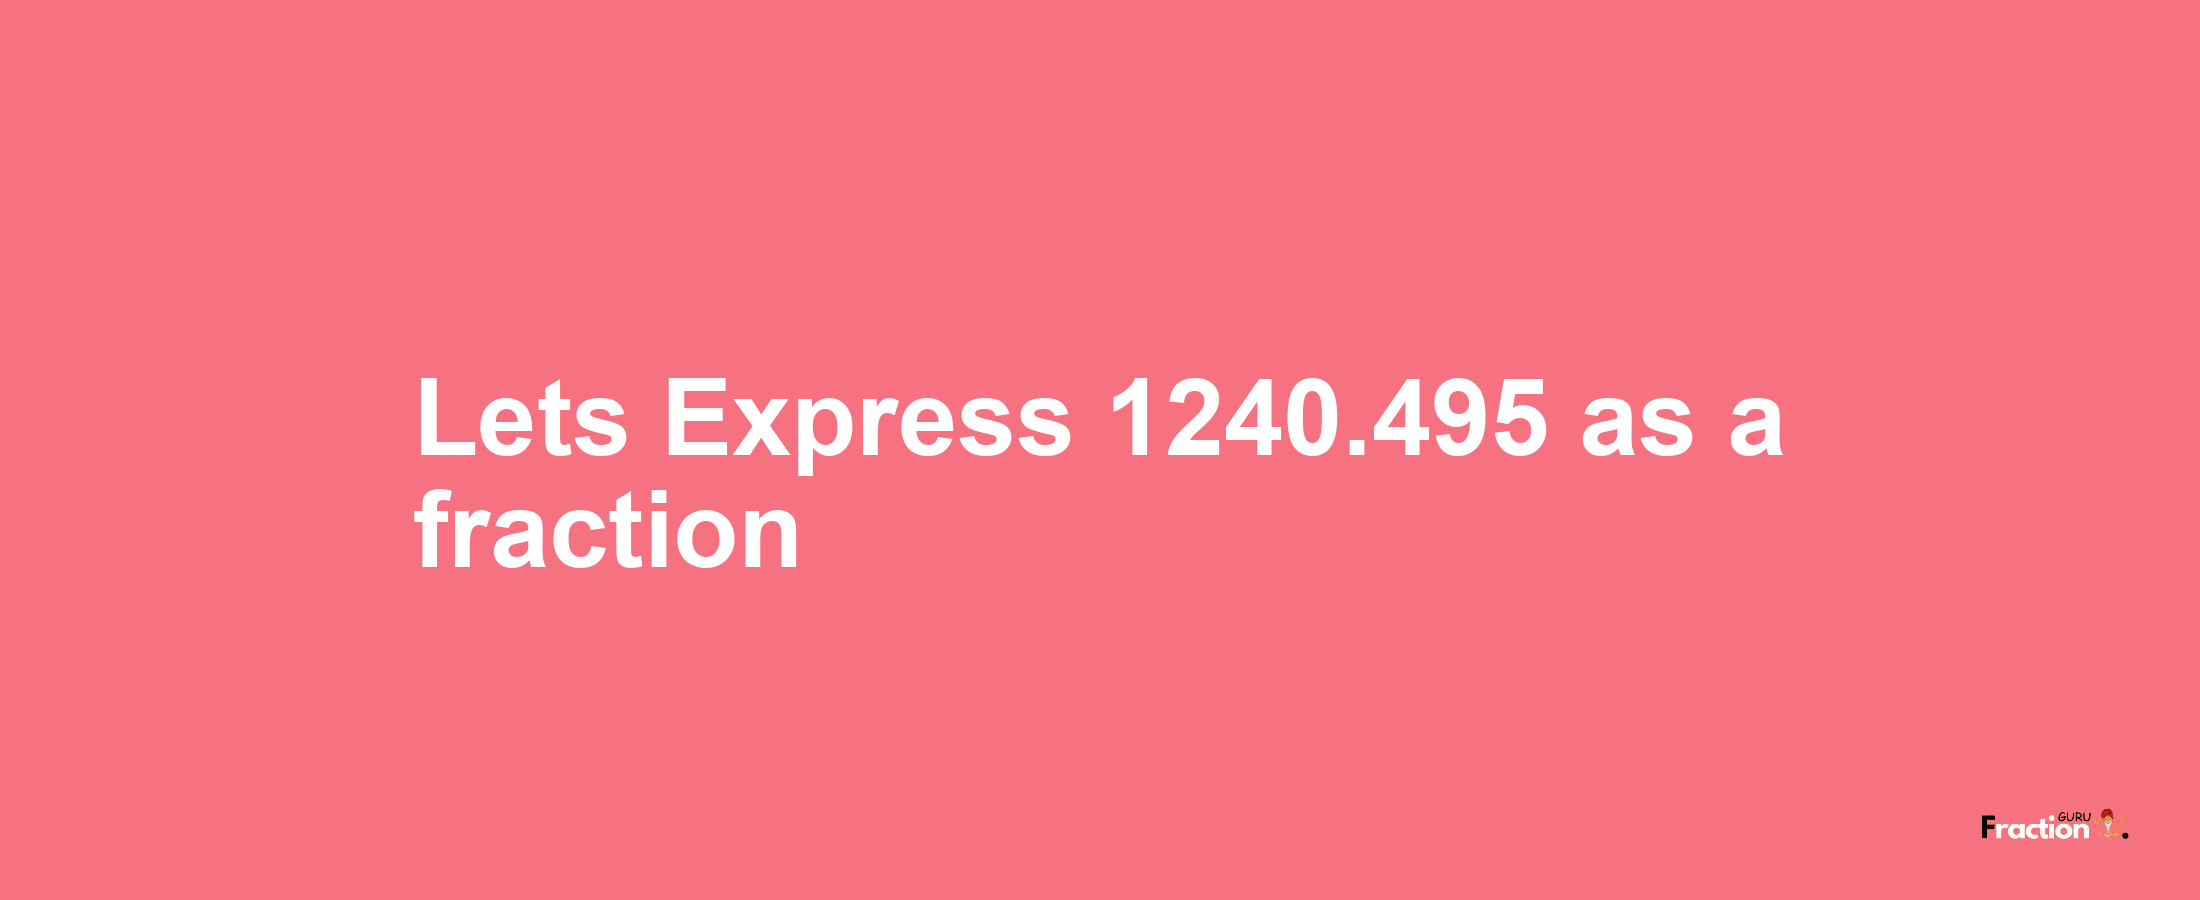 Lets Express 1240.495 as afraction